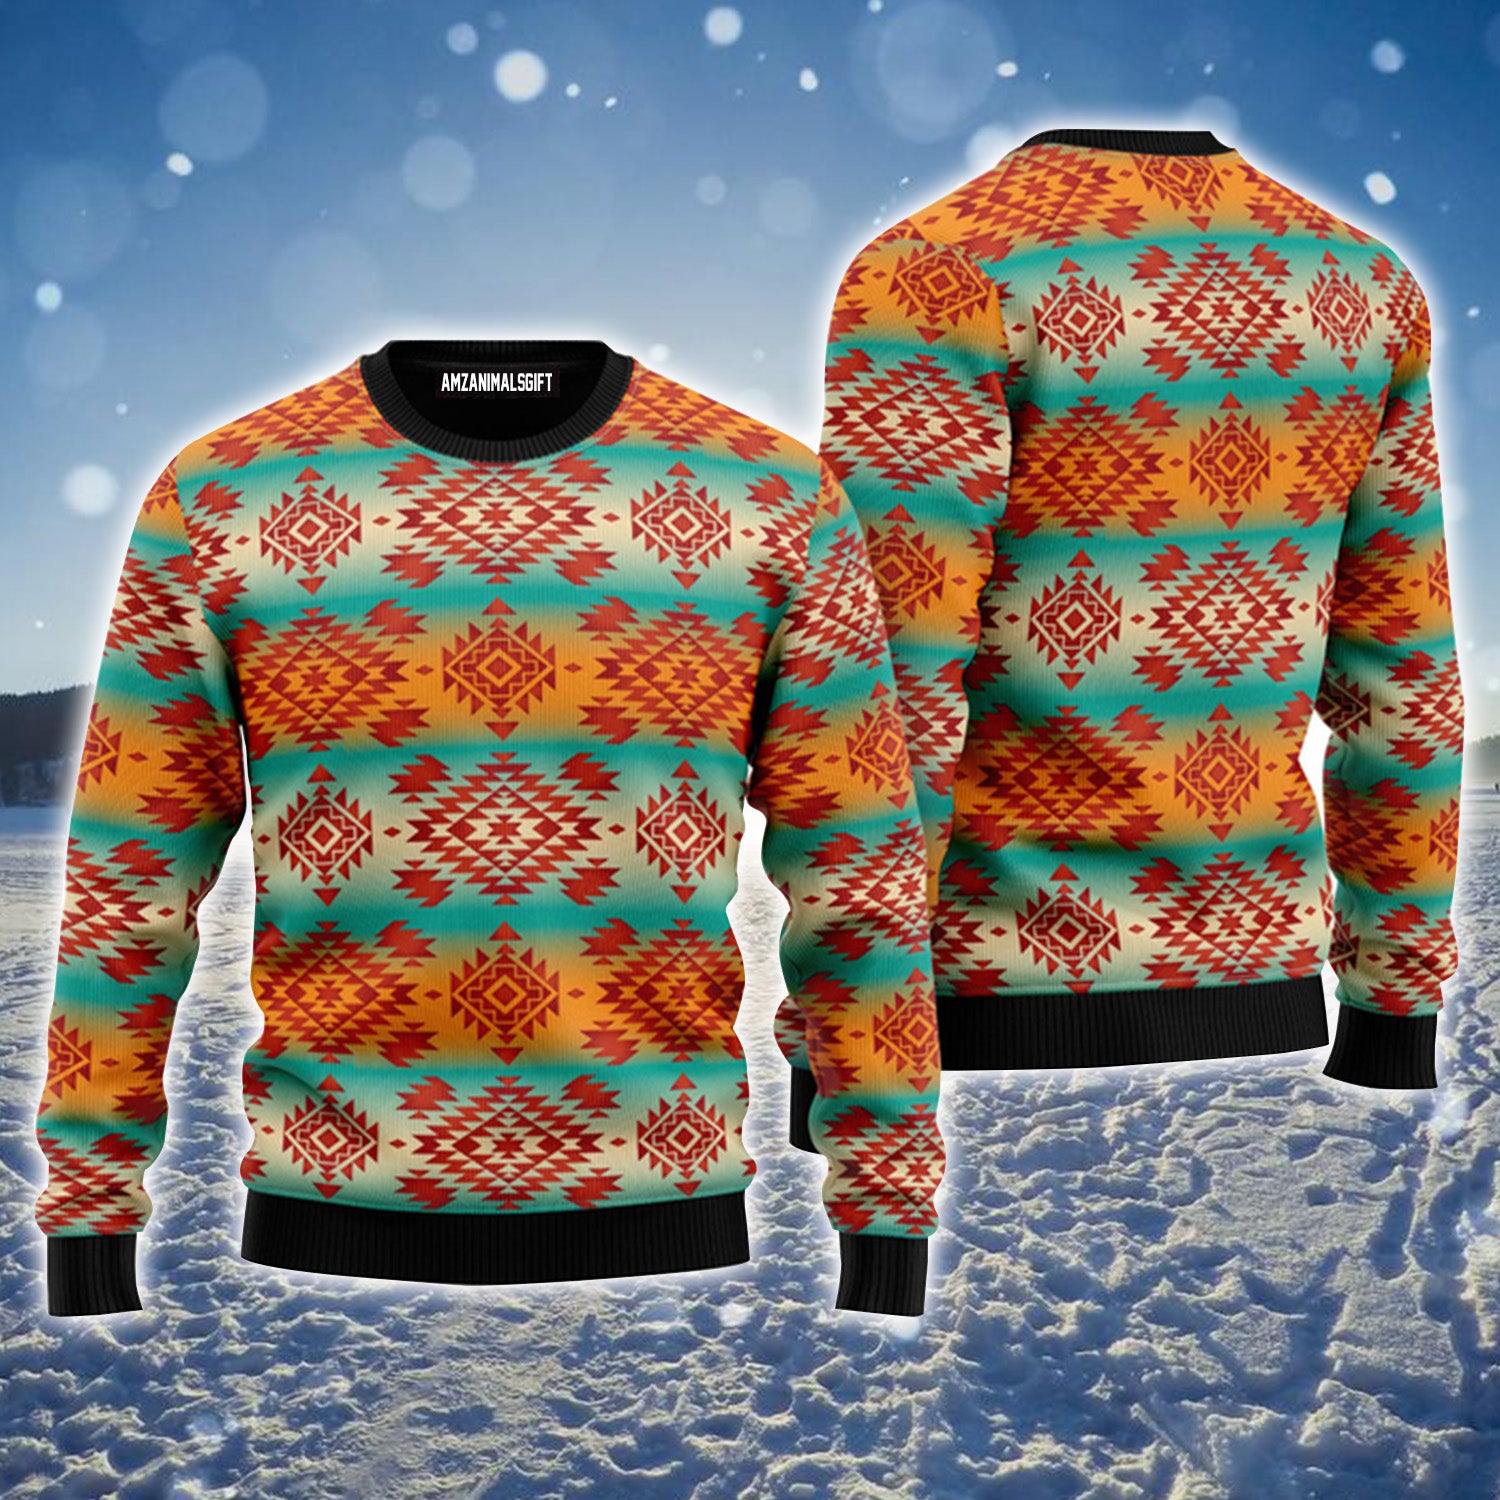 Native American Fabric Pattern Urly Christmas Sweater, Christmas Sweater For Men & Women - Perfect Gift For Christmas, New Year, Winter Holiday